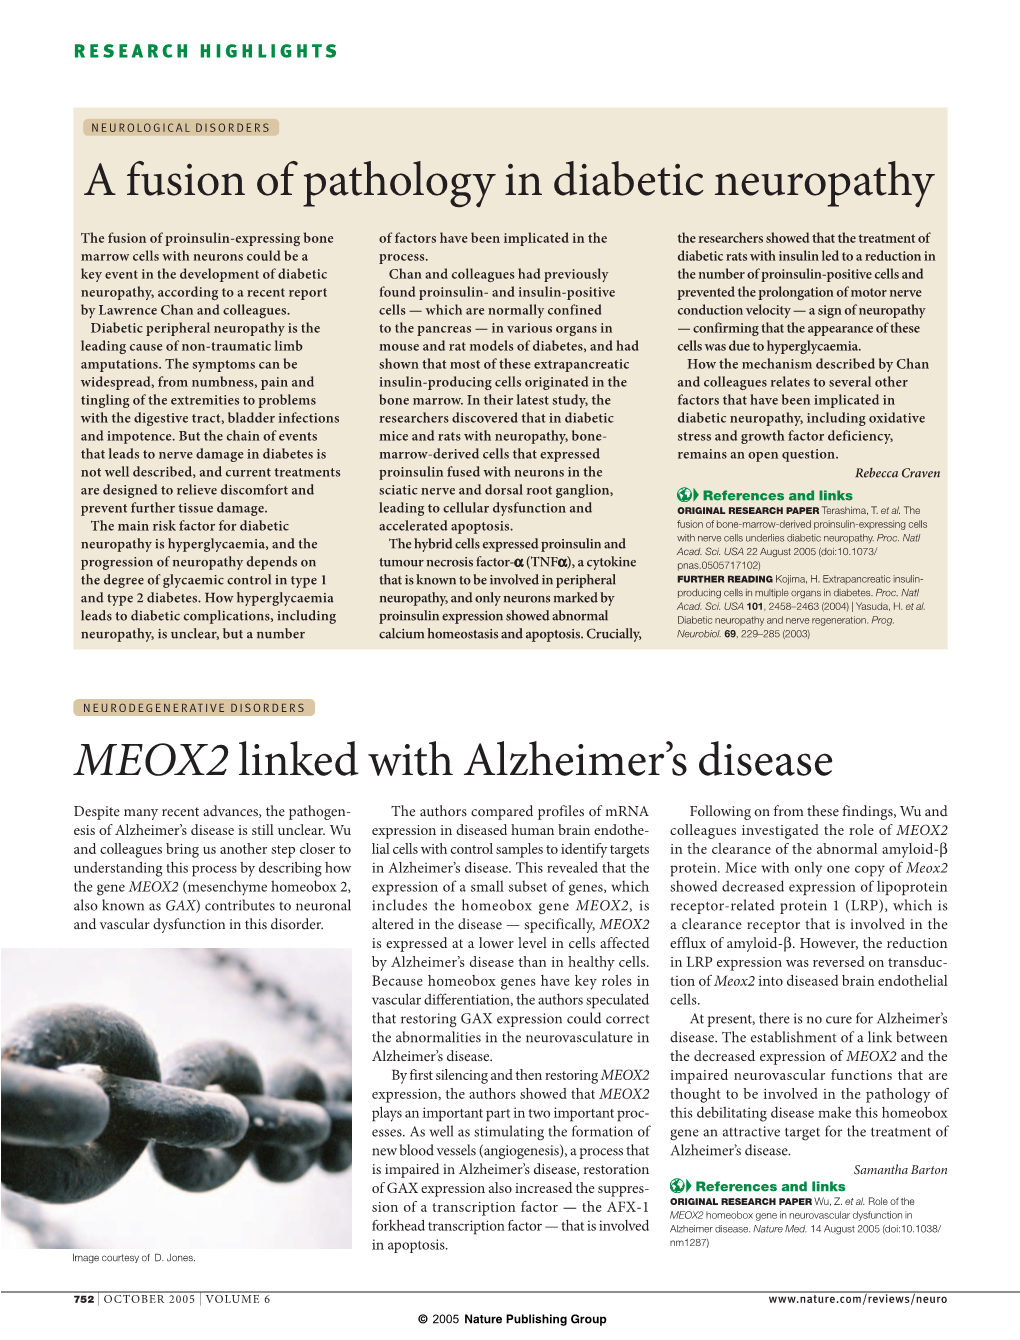 A Fusion of Pathology in Diabetic Neuropathy MEOX2 Linked With